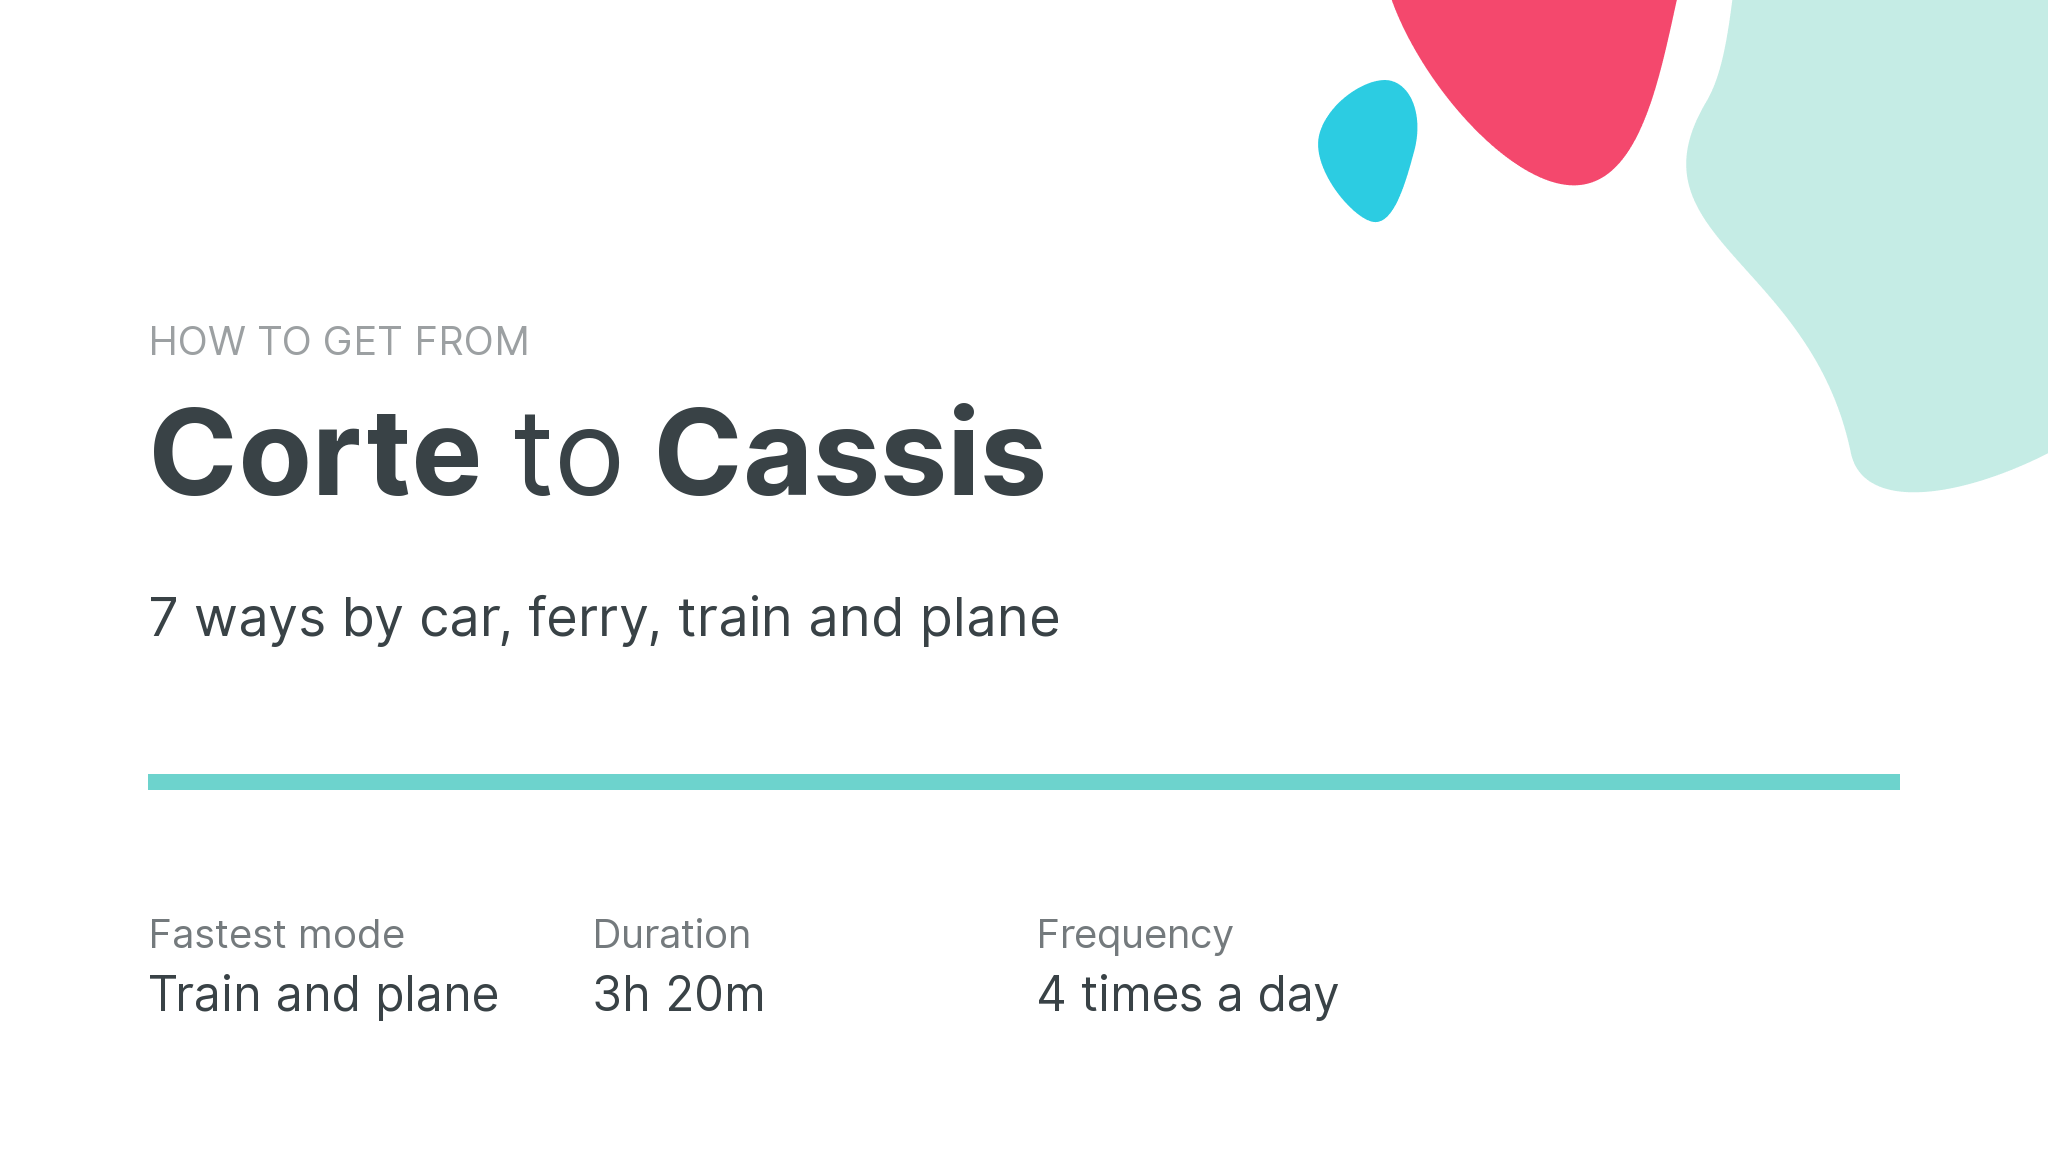 How do I get from Corte to Cassis